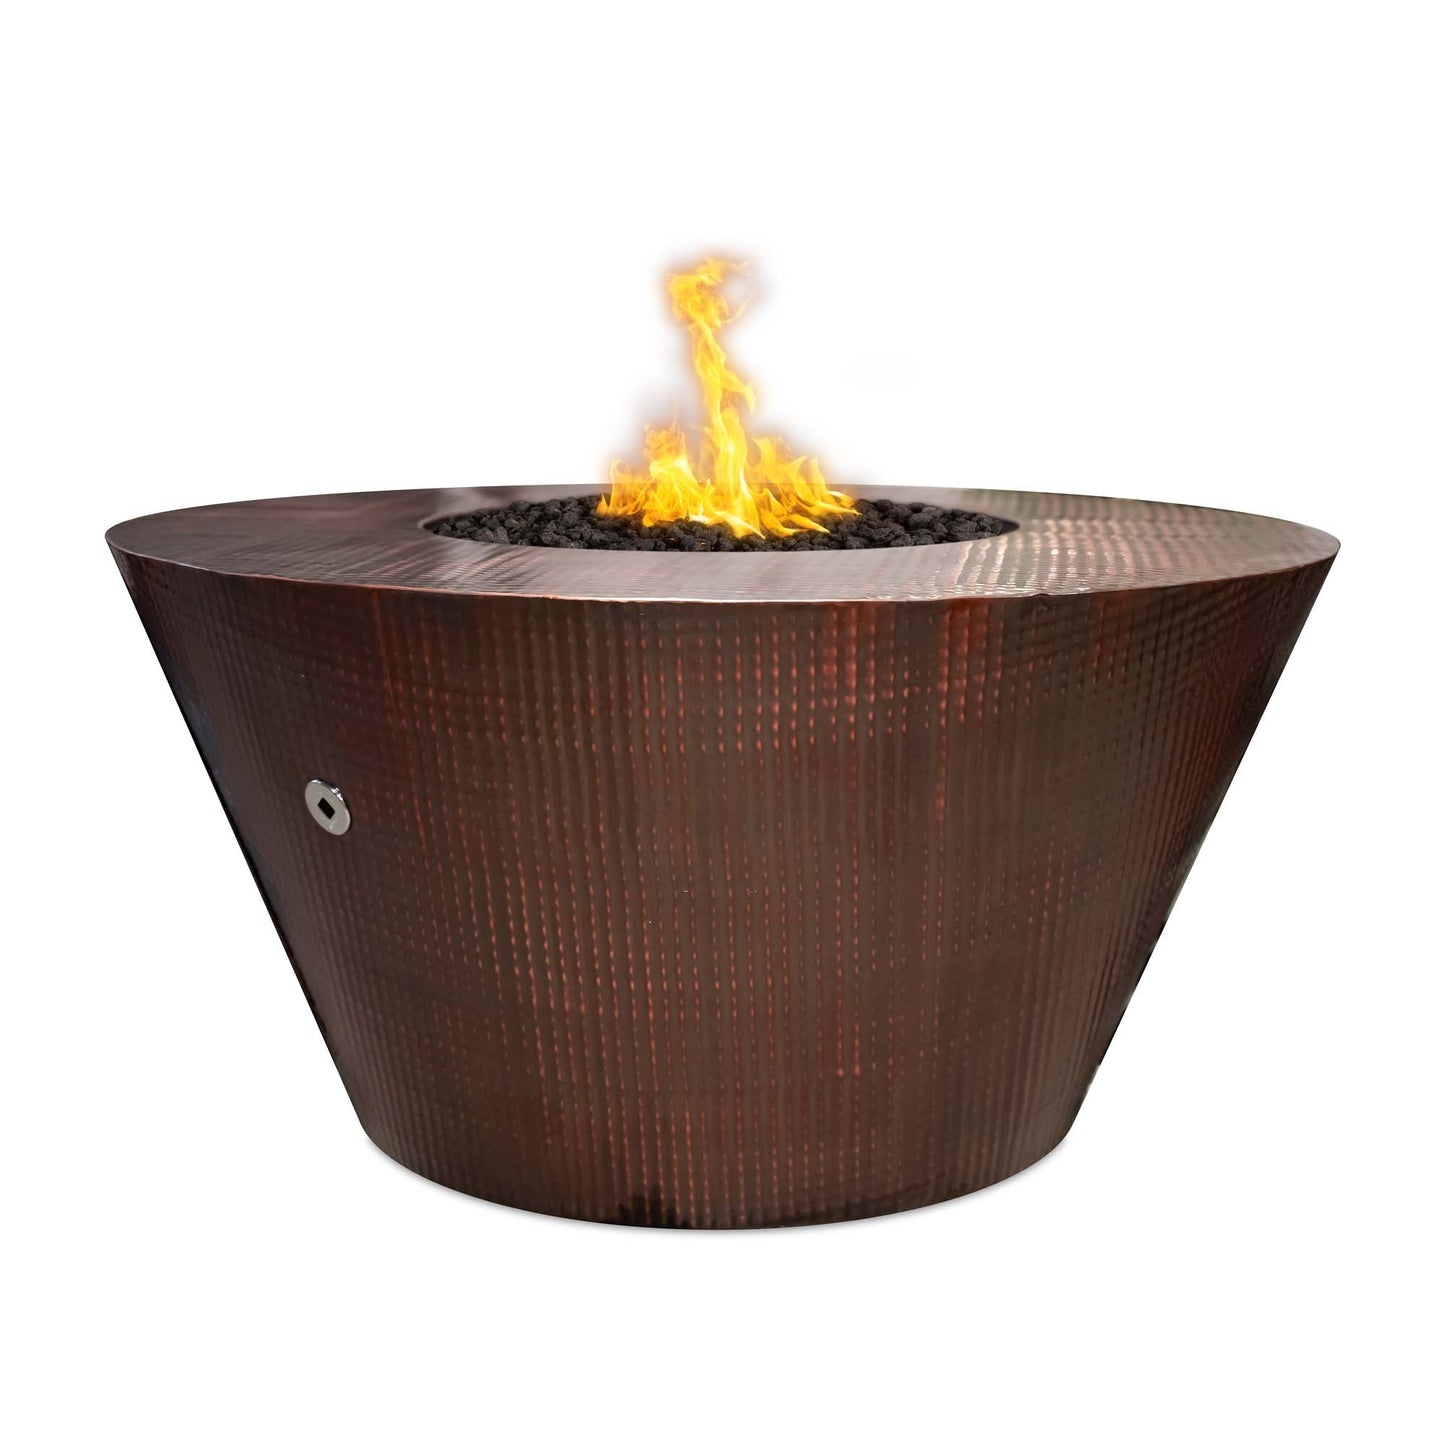 The Outdoor Plus Round Martillo 48" Stainless Steel Liquid Propane Fire Pit with Flame Sense with Spark Ignition